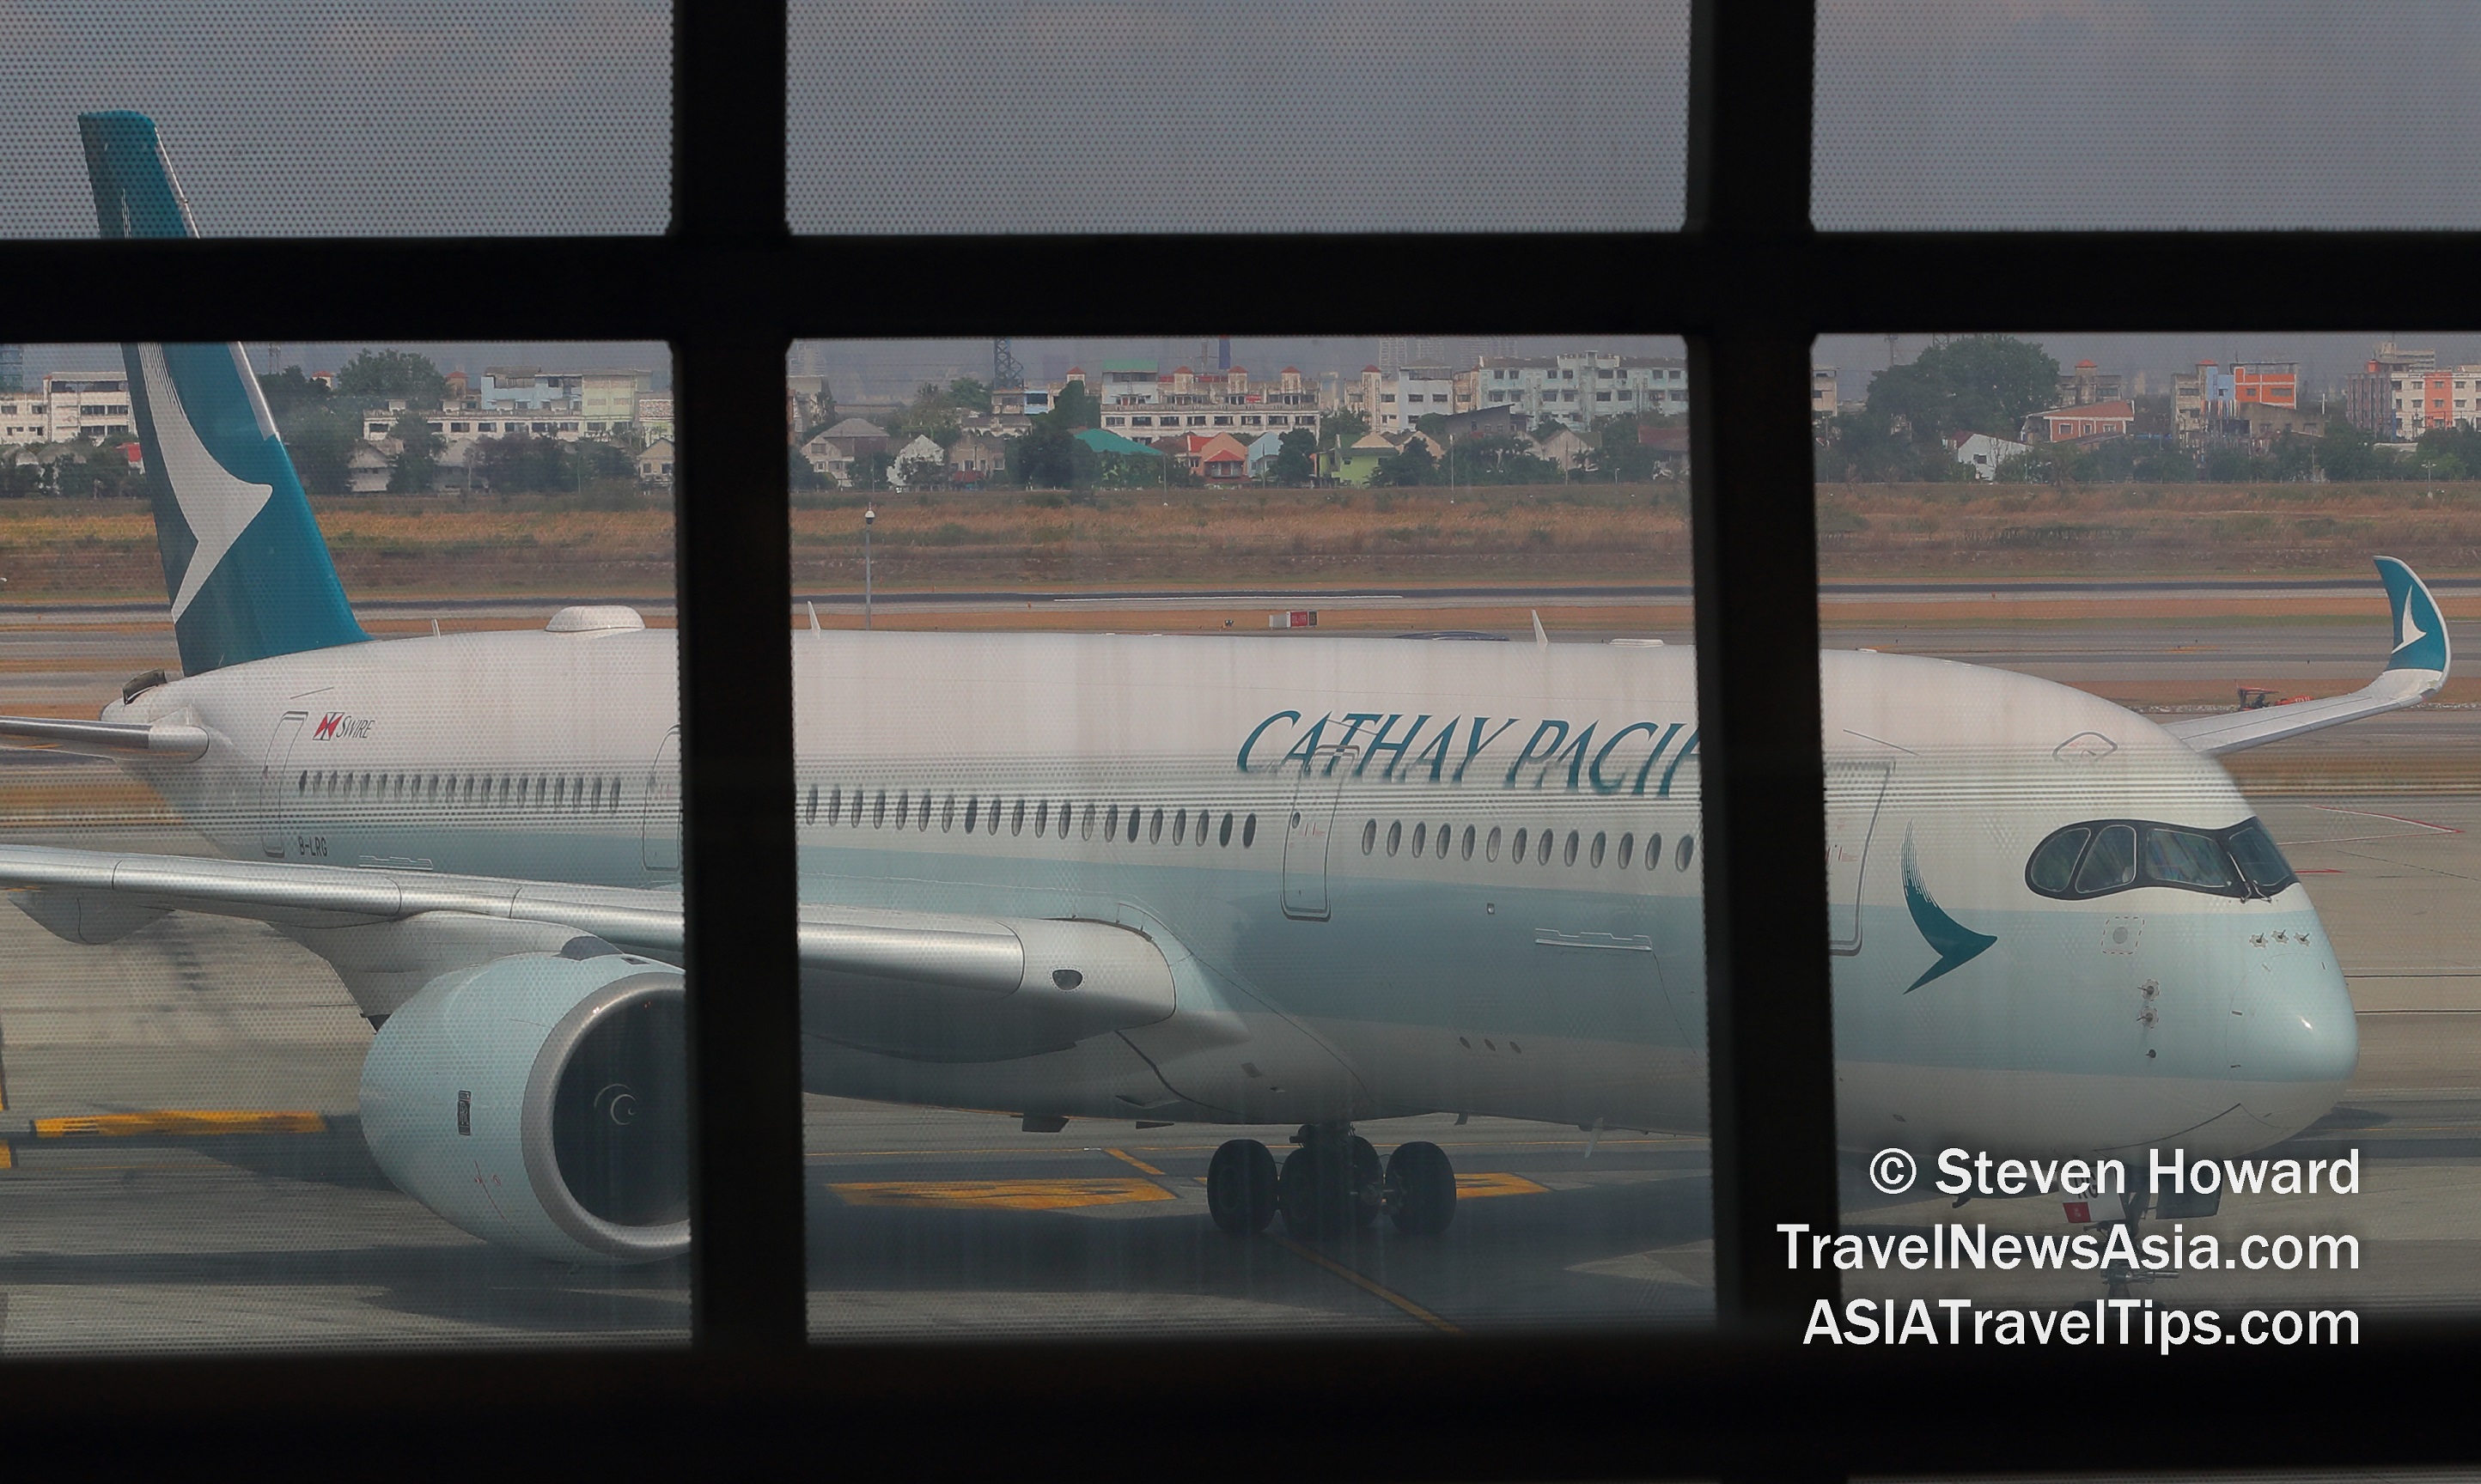 Cathay Pacific Airbus A350. Picture by Steven Howard of TravelNewsAsia.com Click to enlarge.